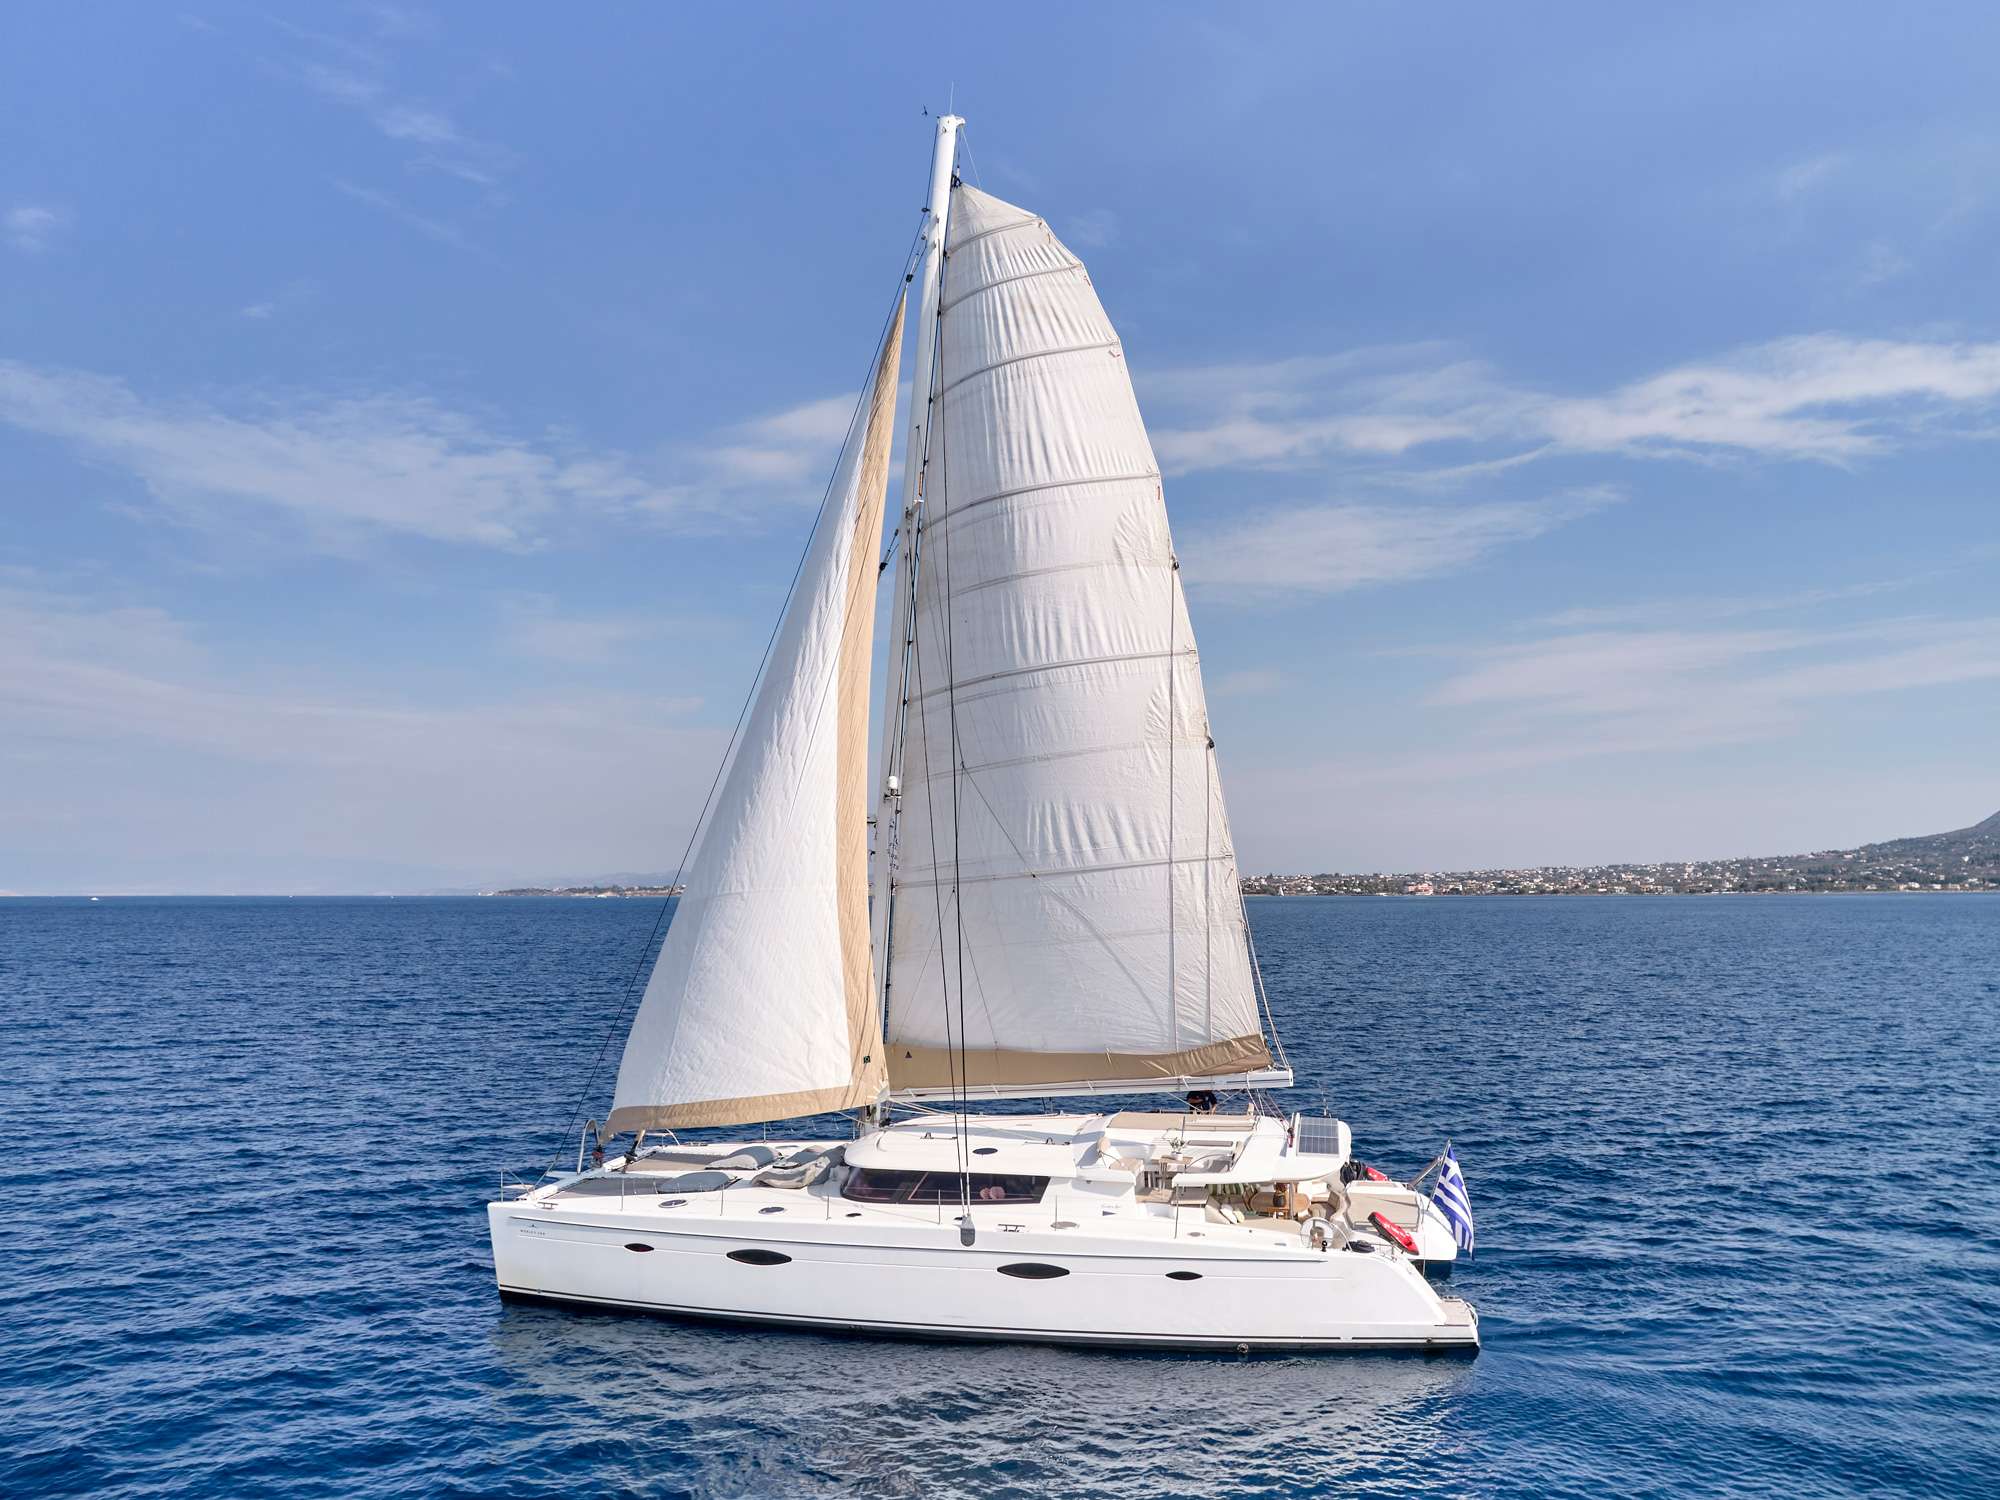 WORLD'S END (MED) Yacht Charter - Ritzy Charters